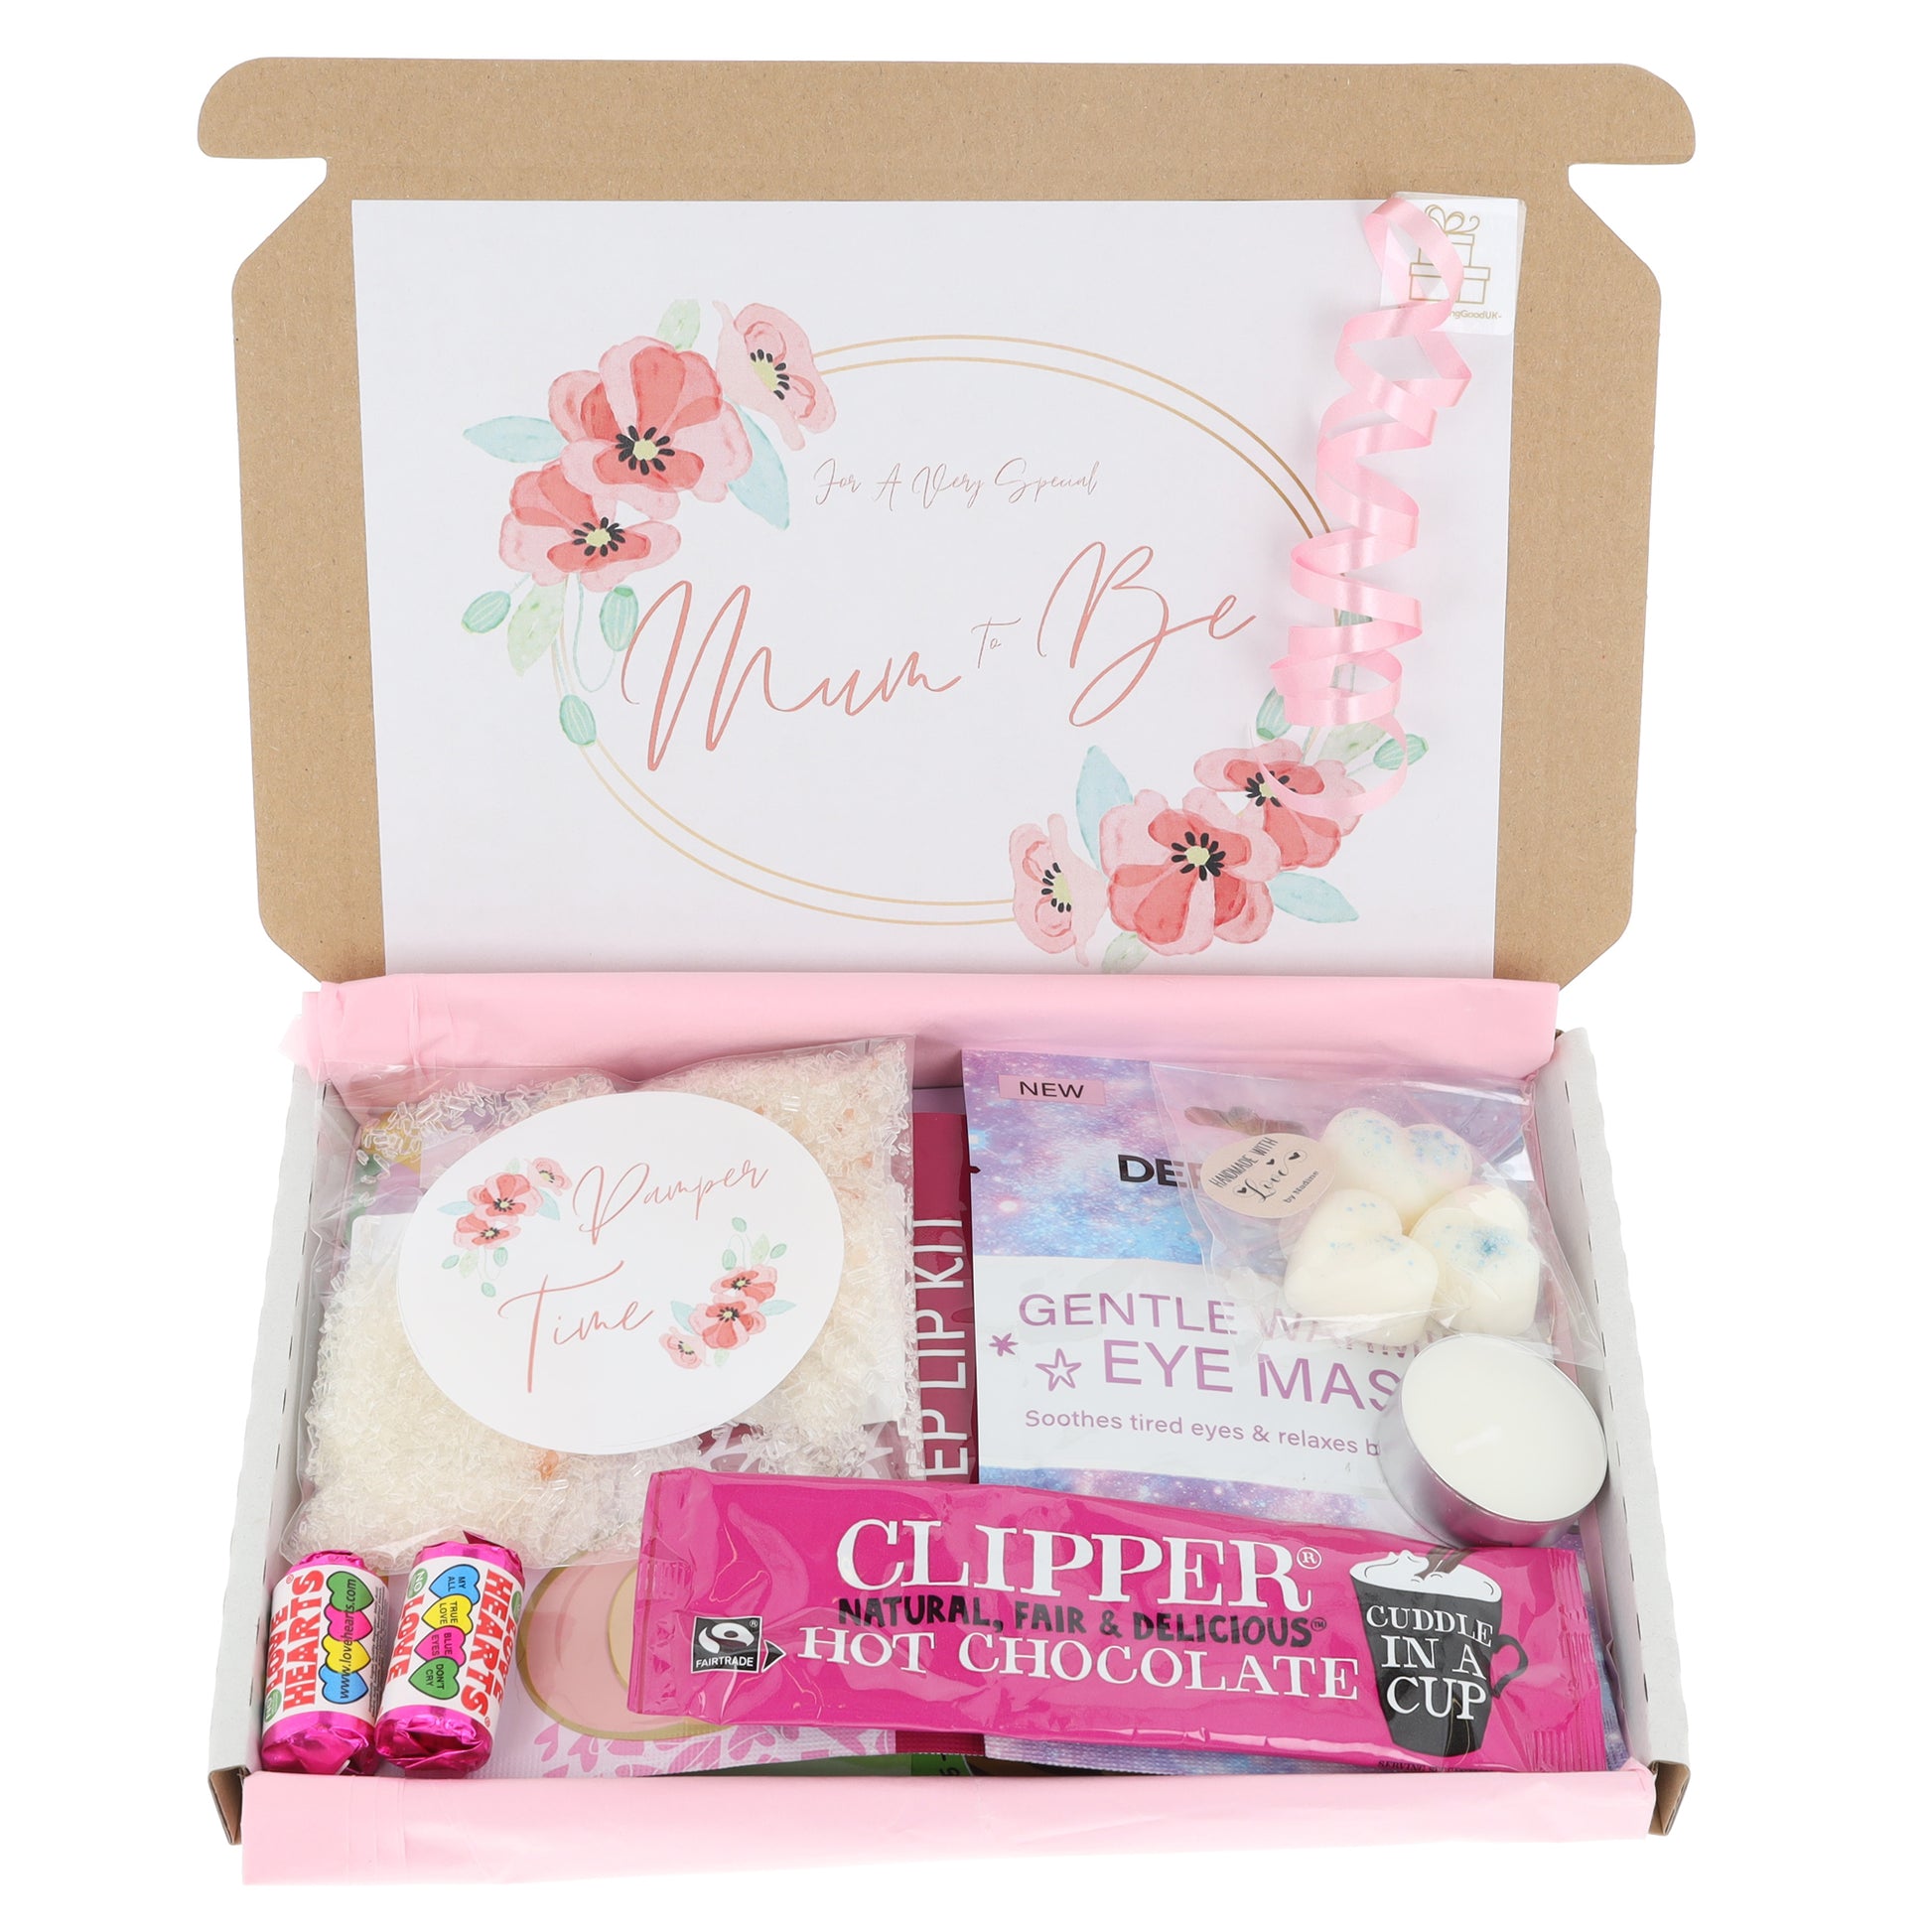 Mum to Be Pregnancy Skincare Letterbox Gift  - Always Looking Good -   